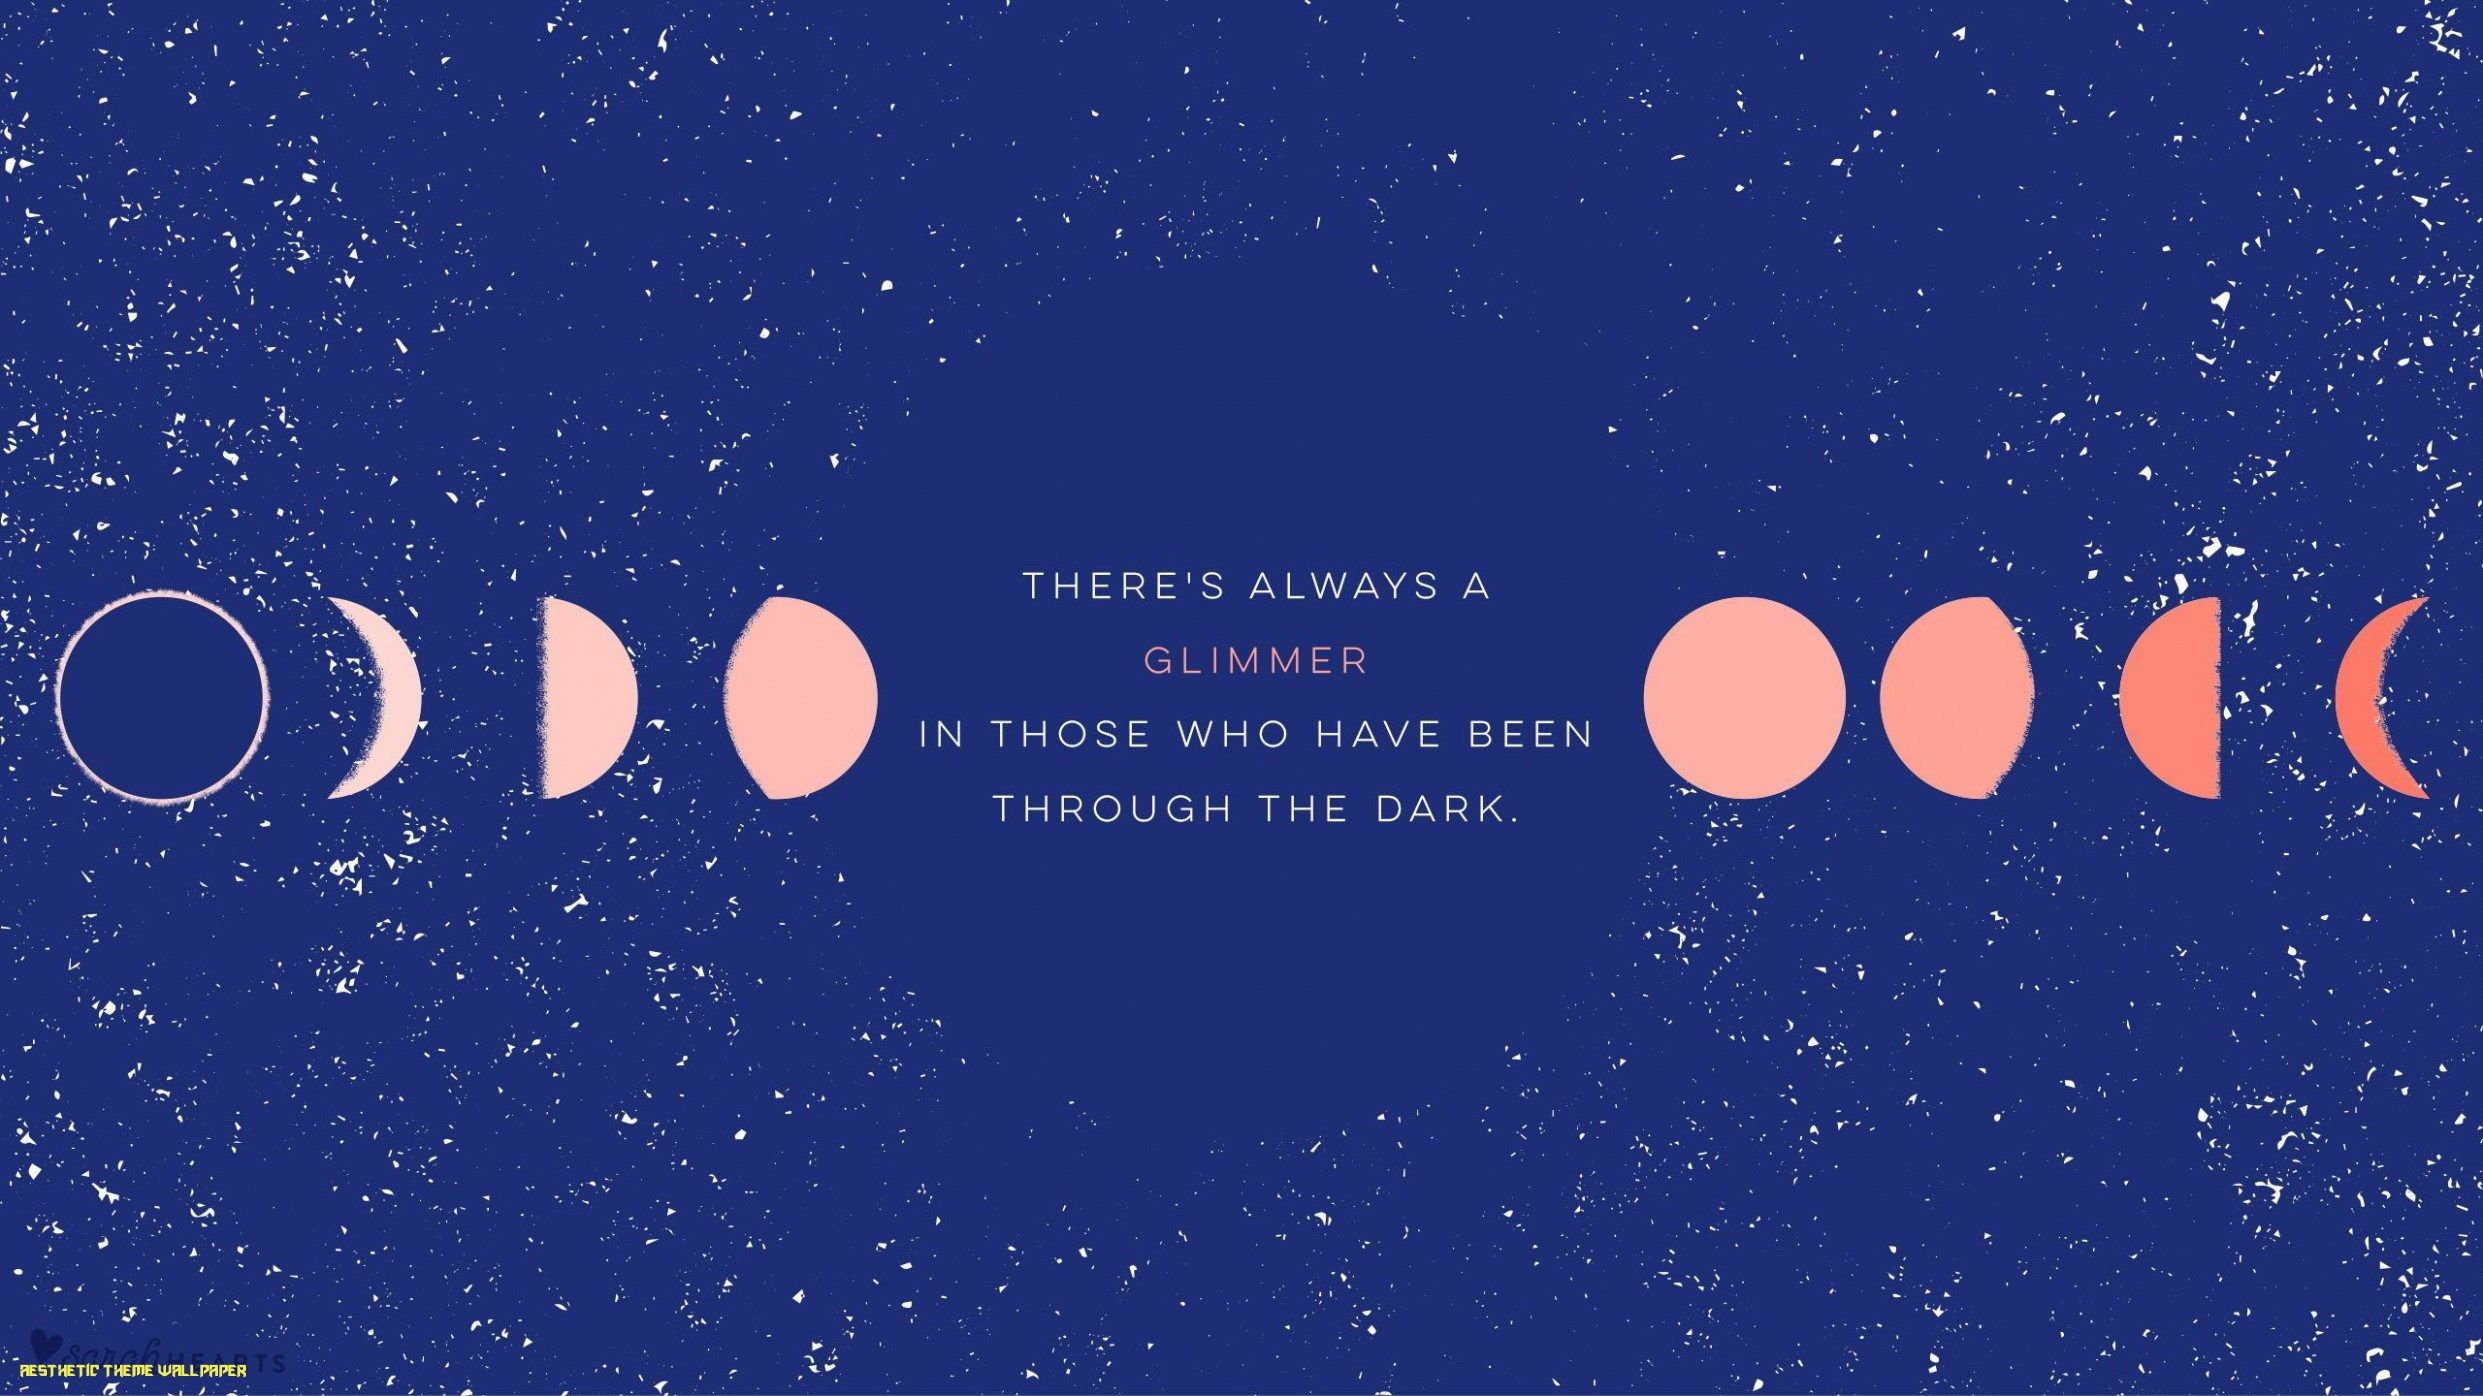 this is a laptop background with a space theme and a quote